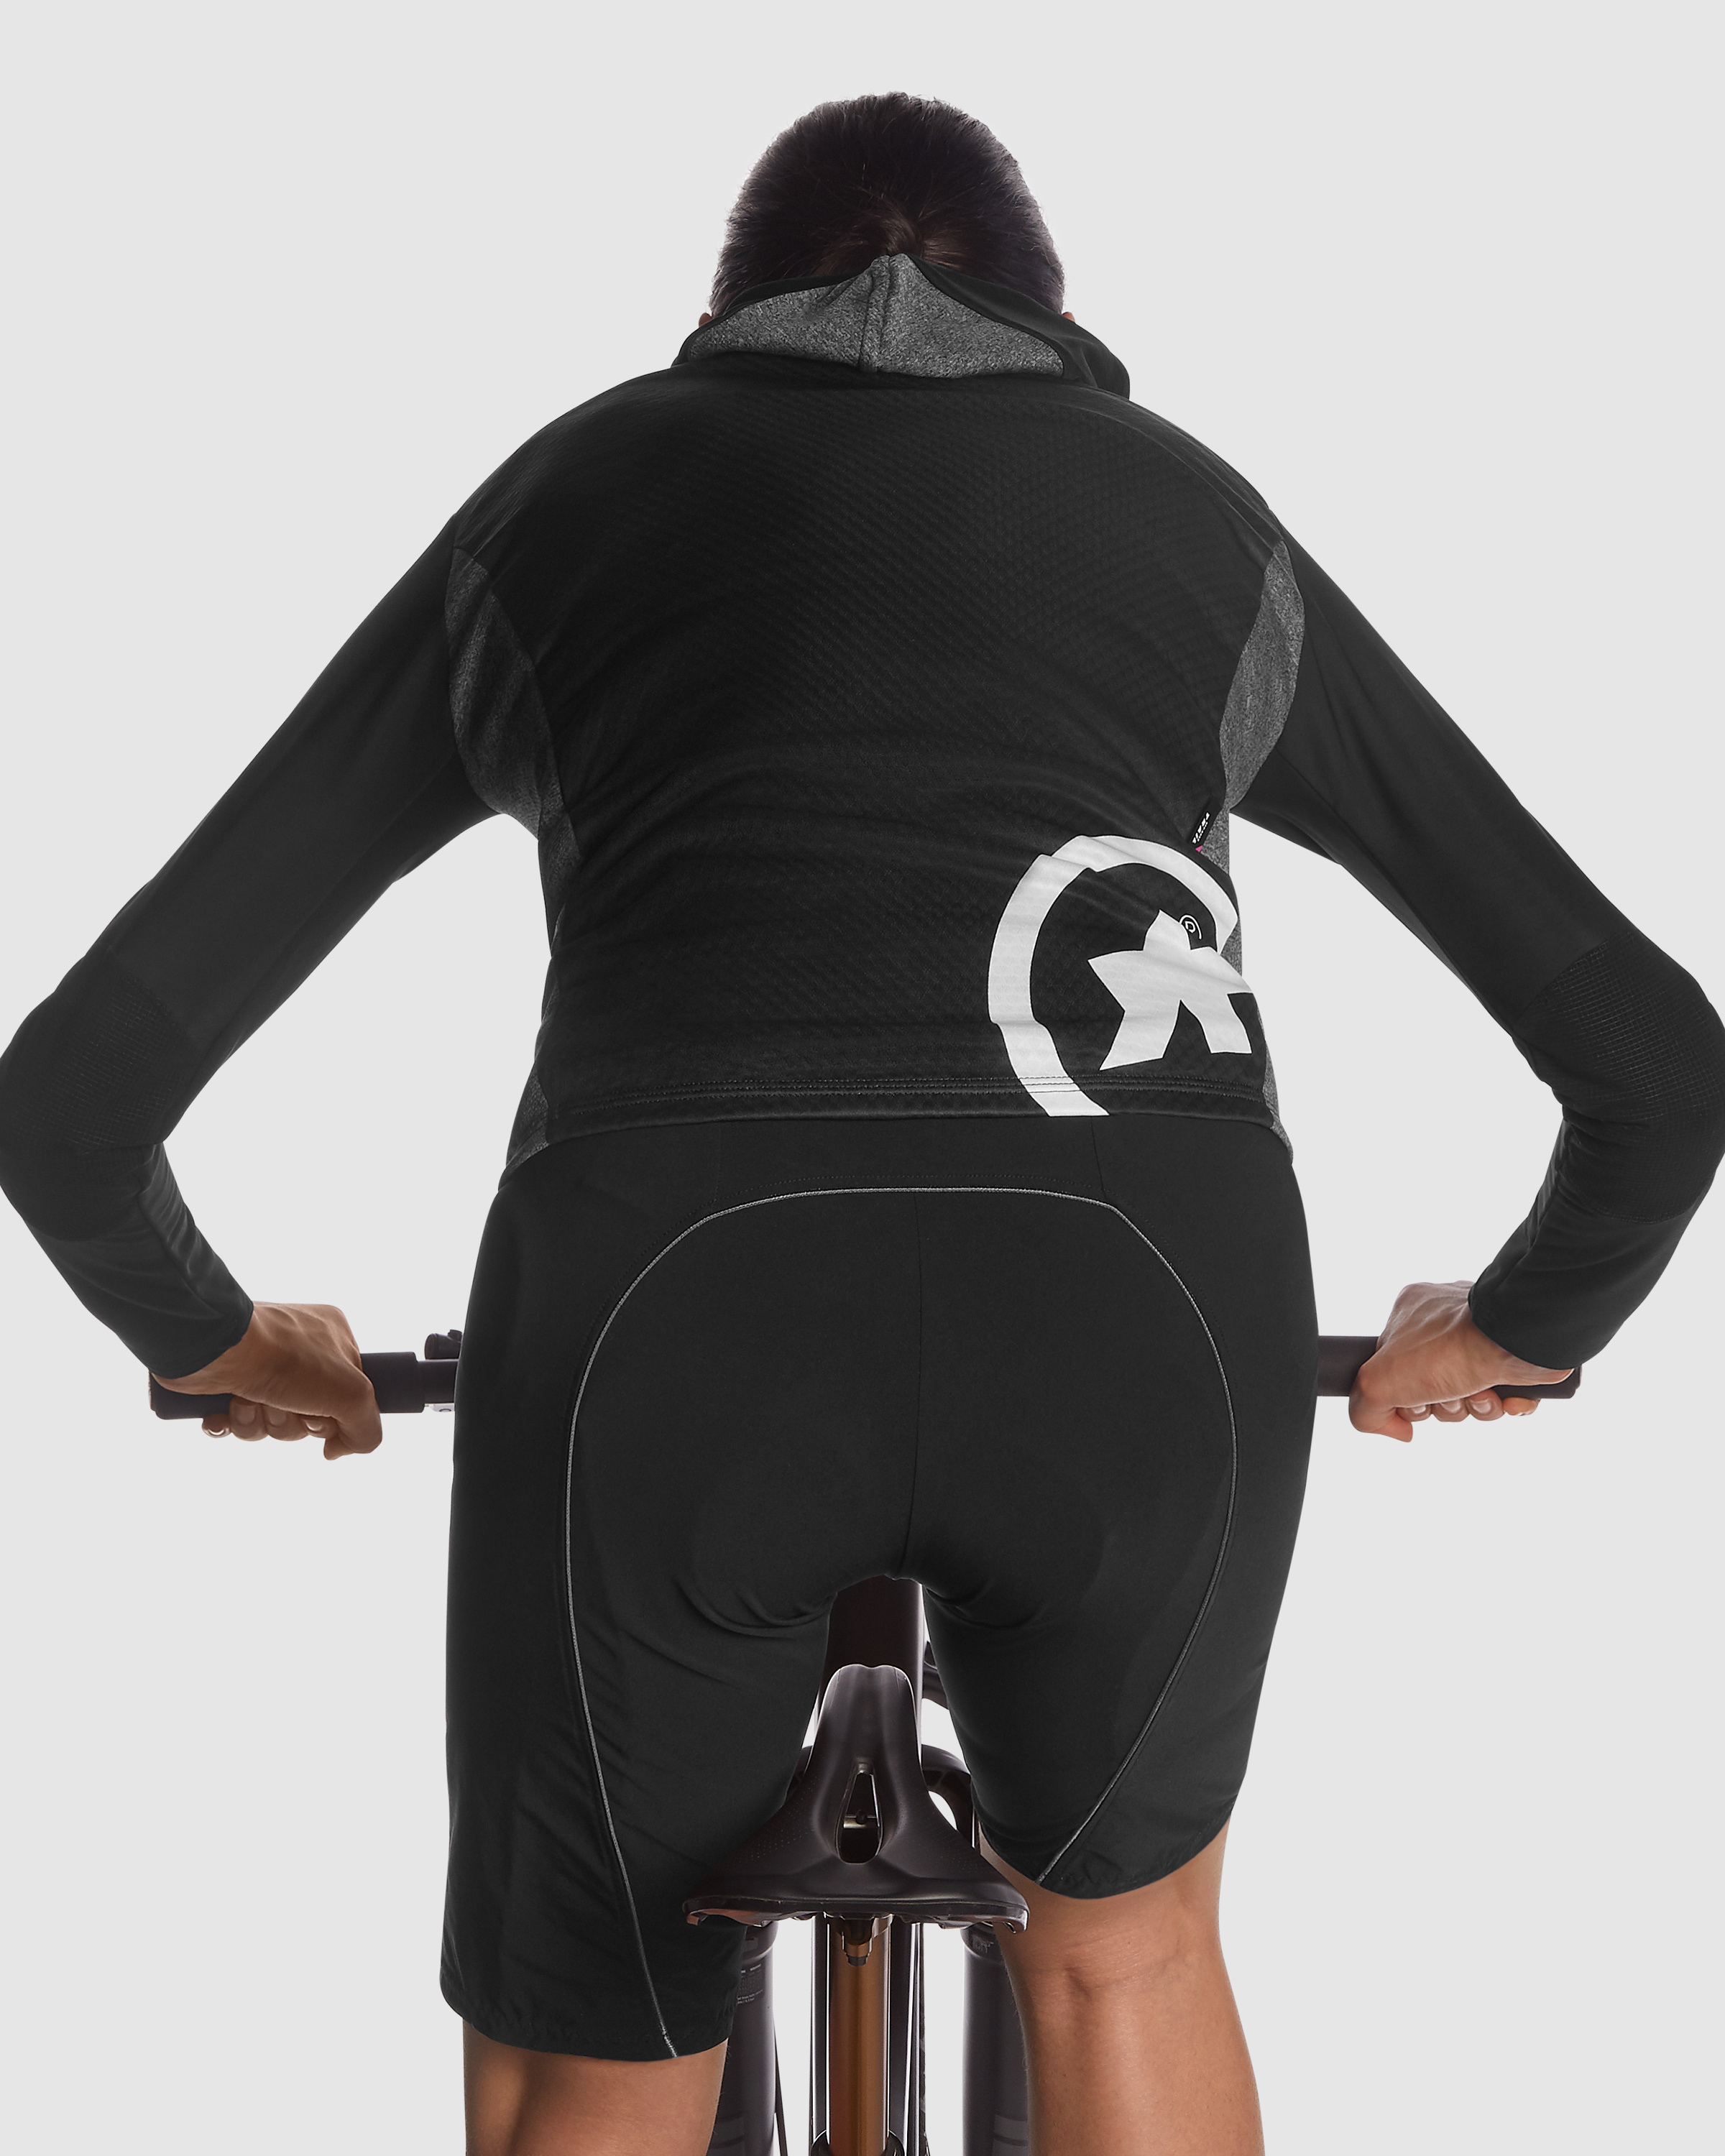 TRAIL Women's Spring Fall Jacket - ASSOS Of Switzerland - Official Outlet